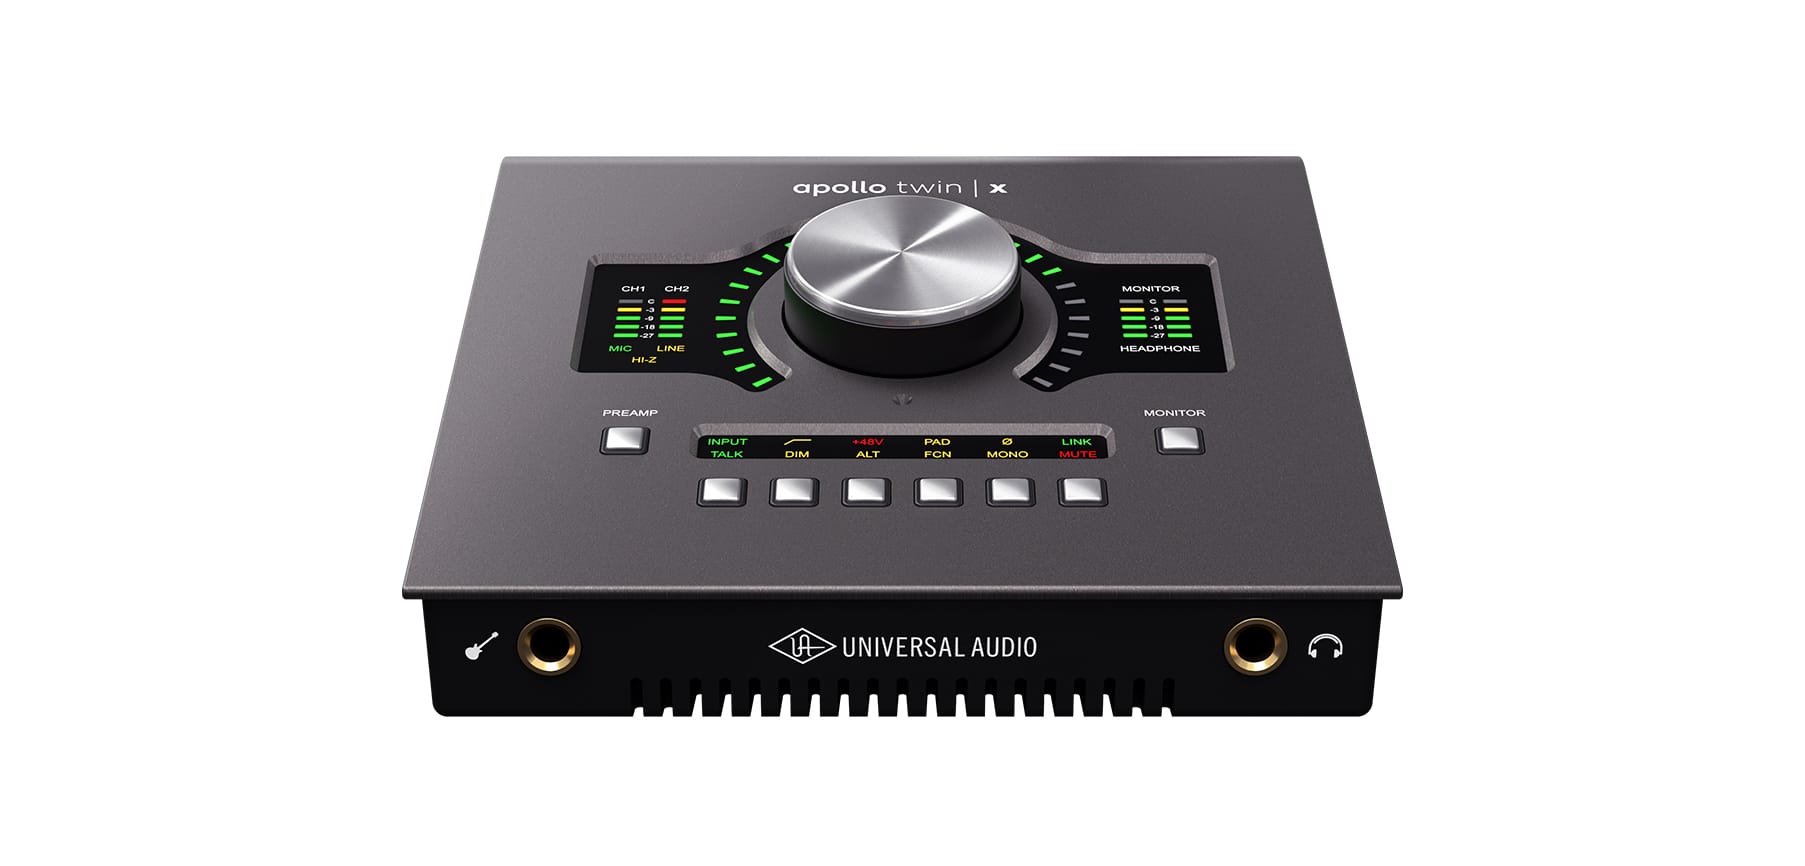 image of the Apollo Twin X interface by Universal Audio